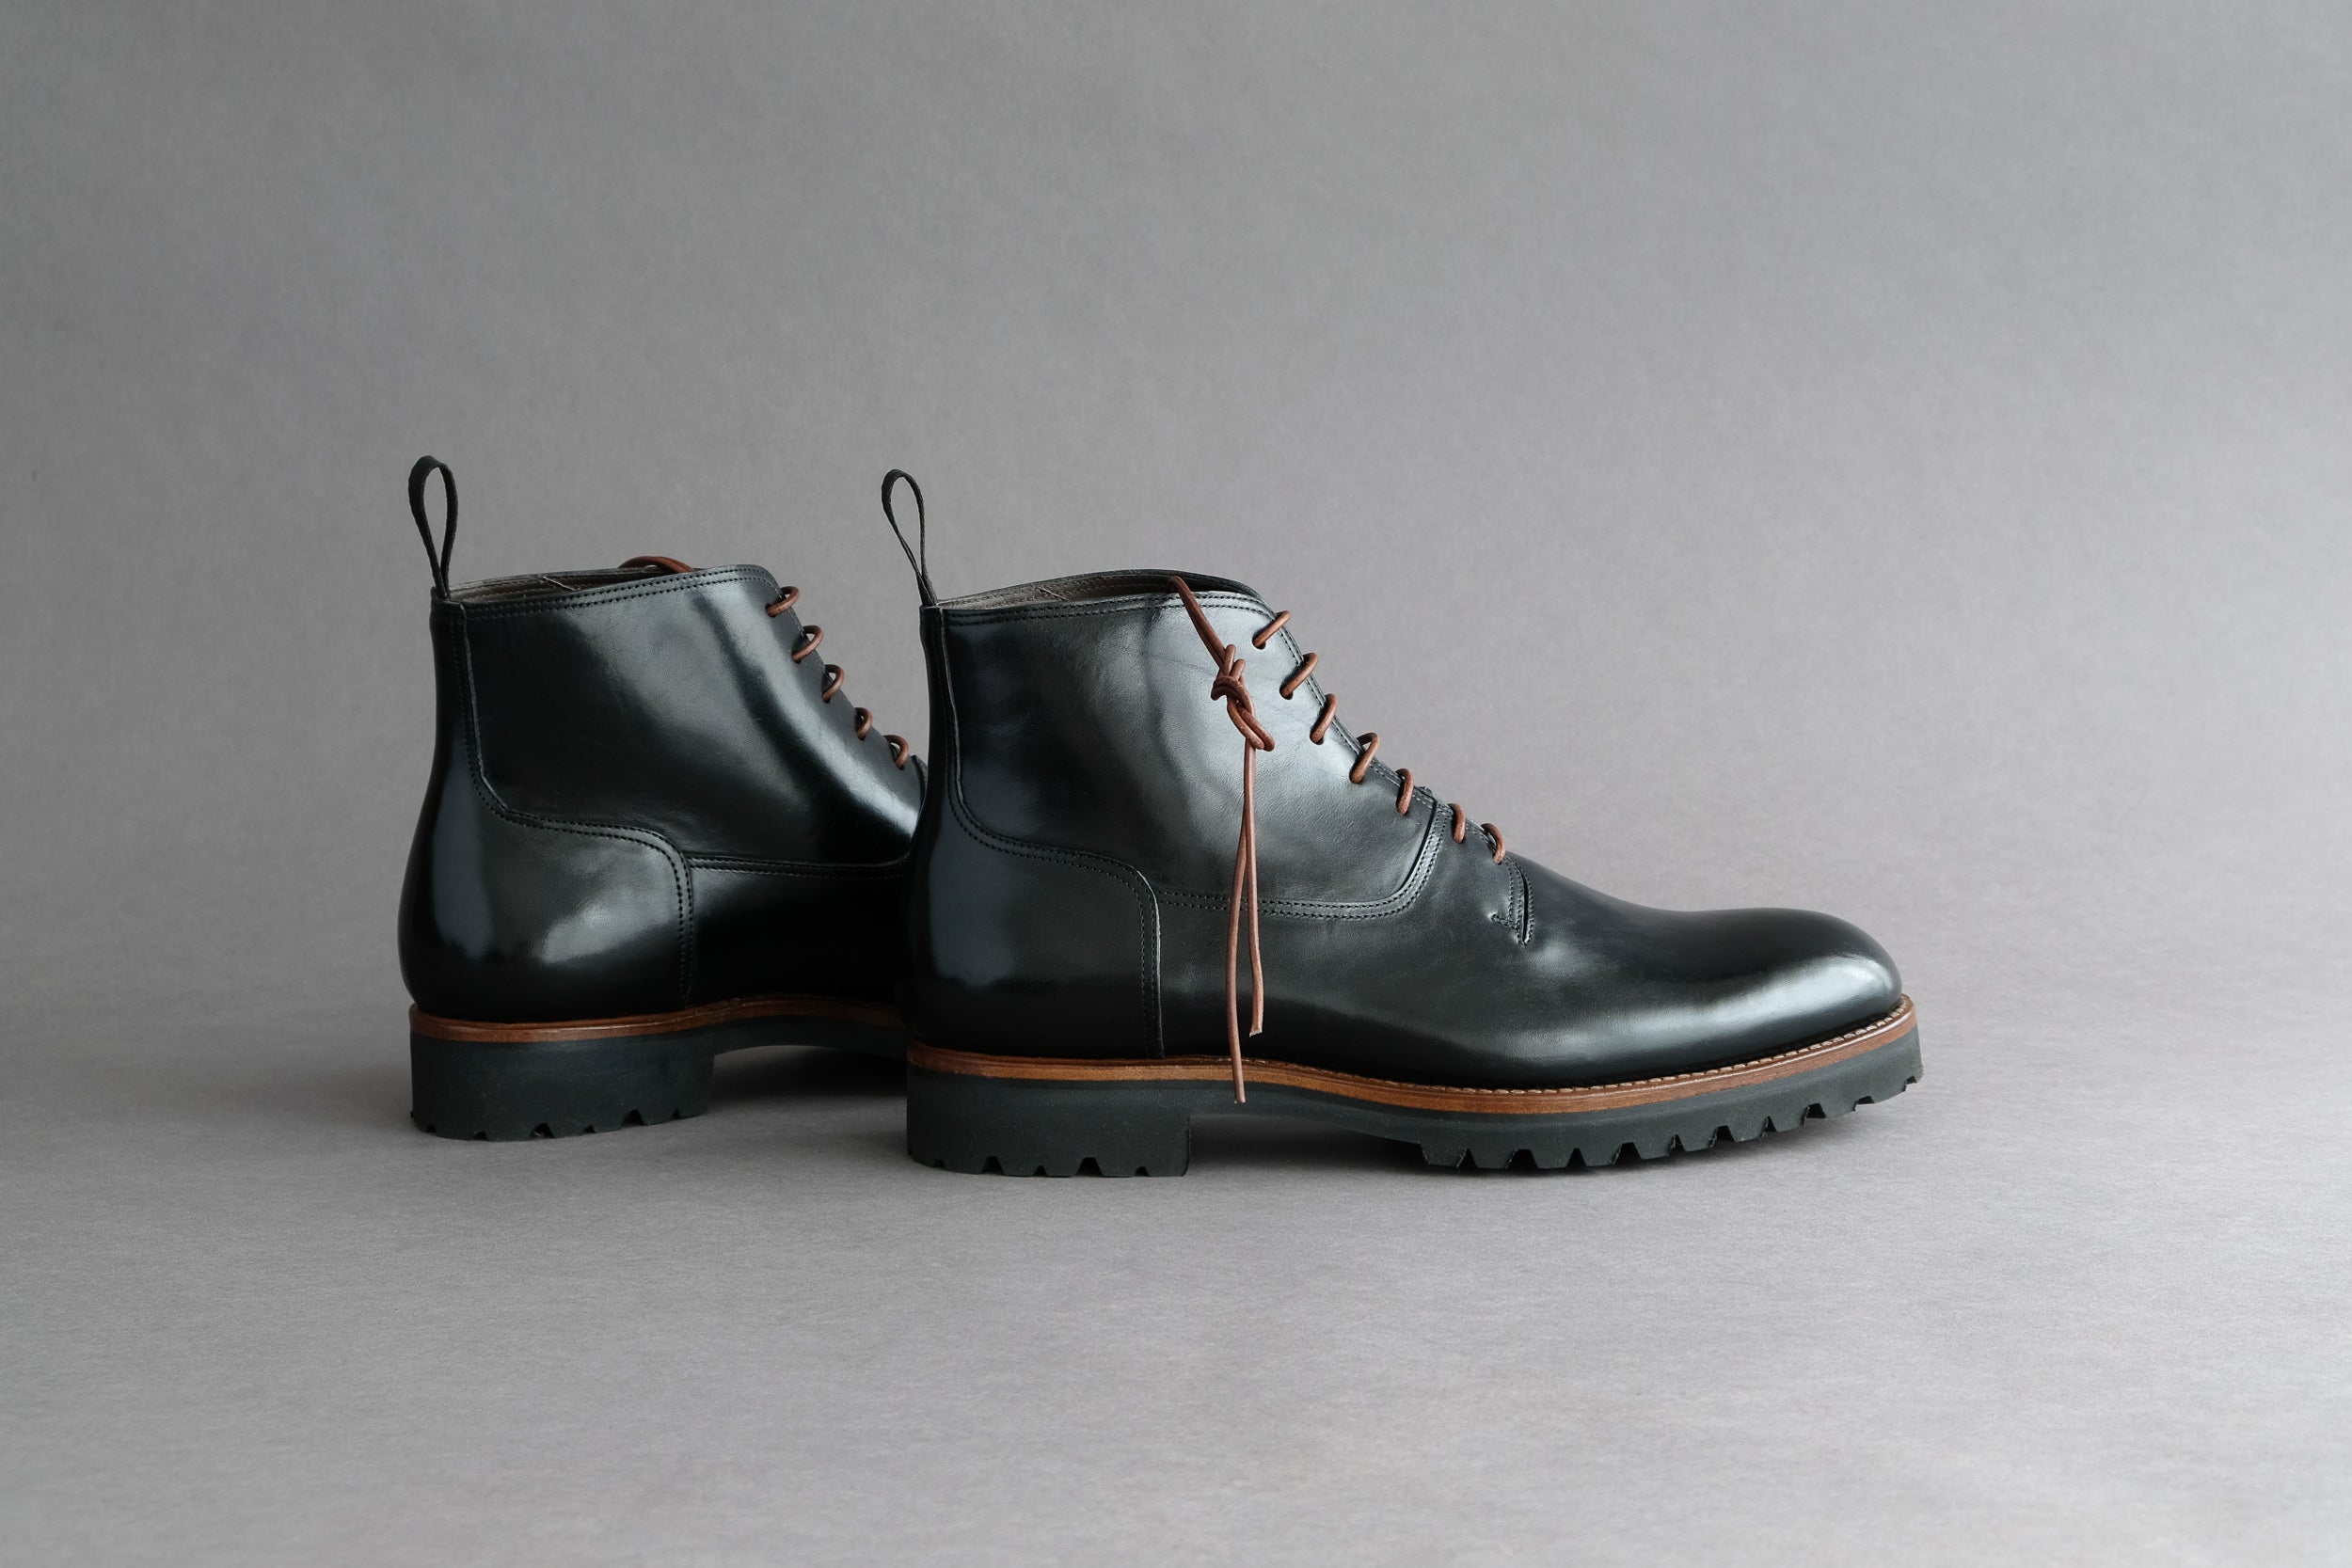 Zonkey Boot hand welted derby boots from black horse leather